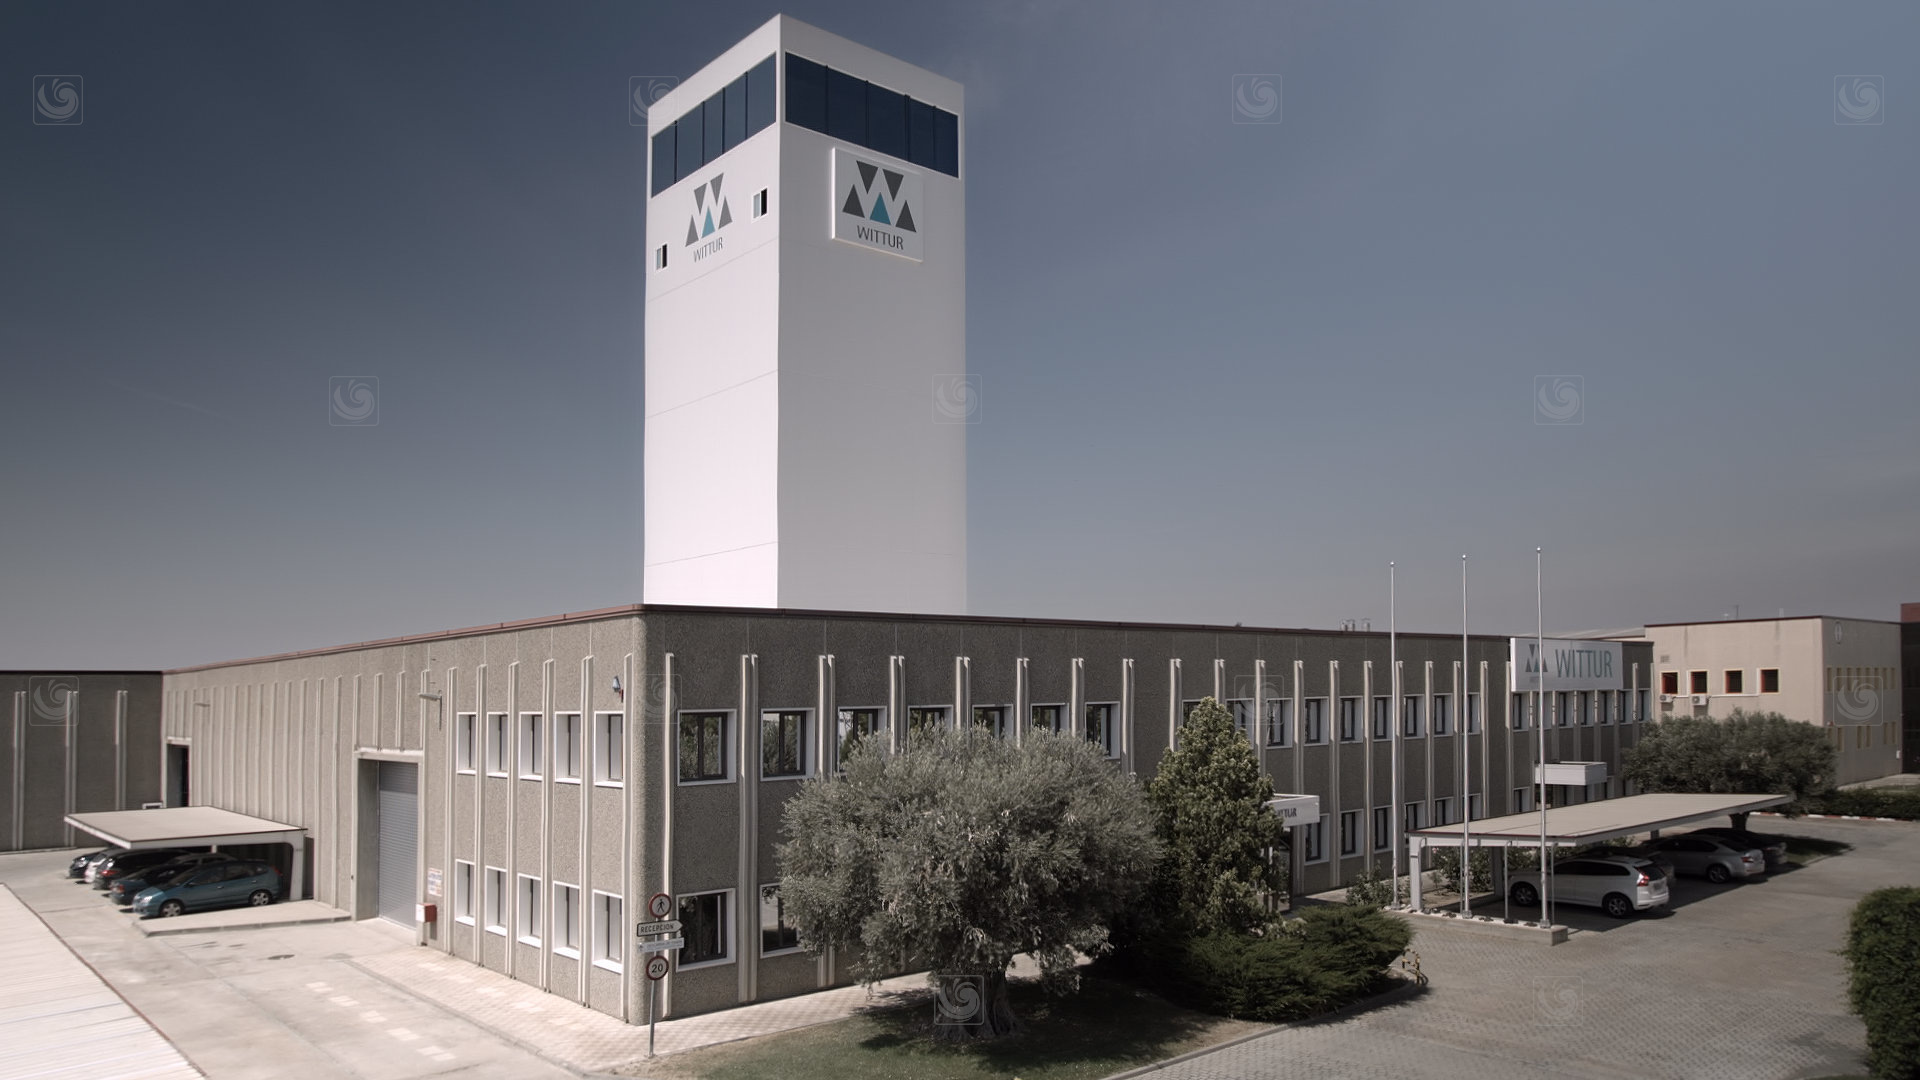 Videoframe from a corporate video for Wittur, showing the Saragossa' facilities